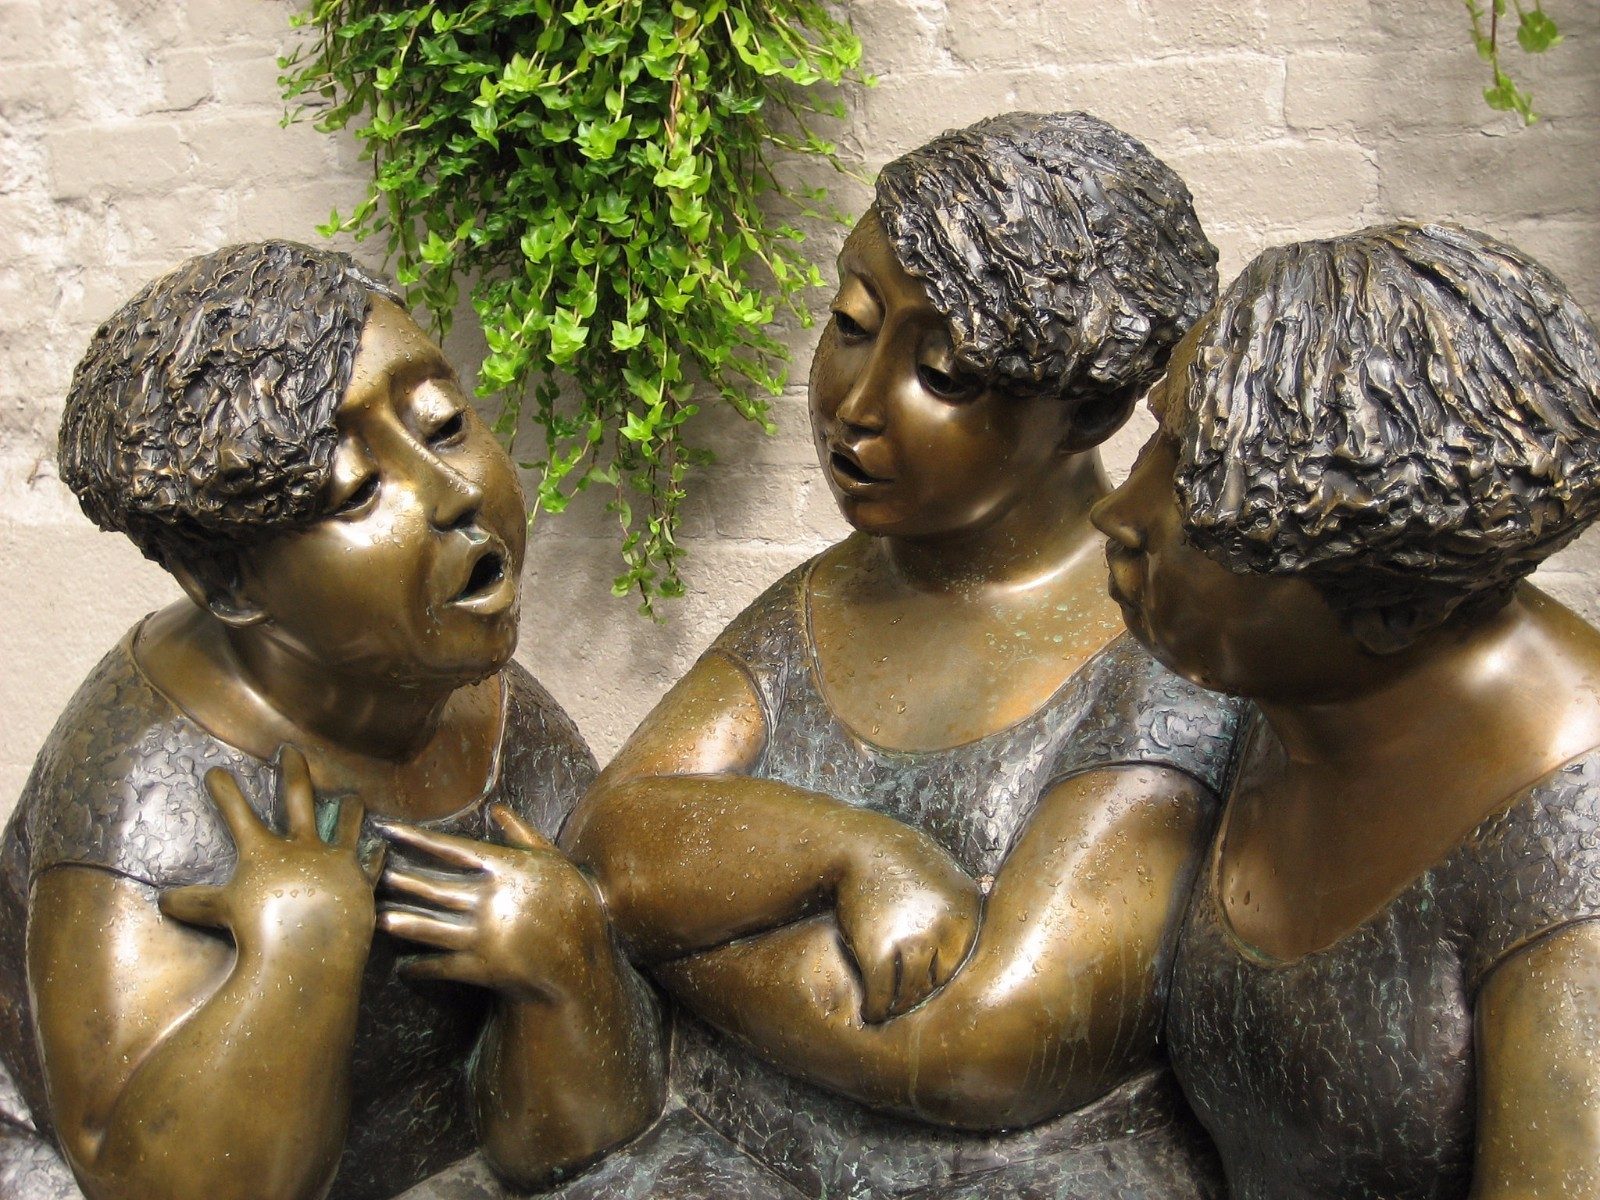 three bronze statues of women. they are in conversation